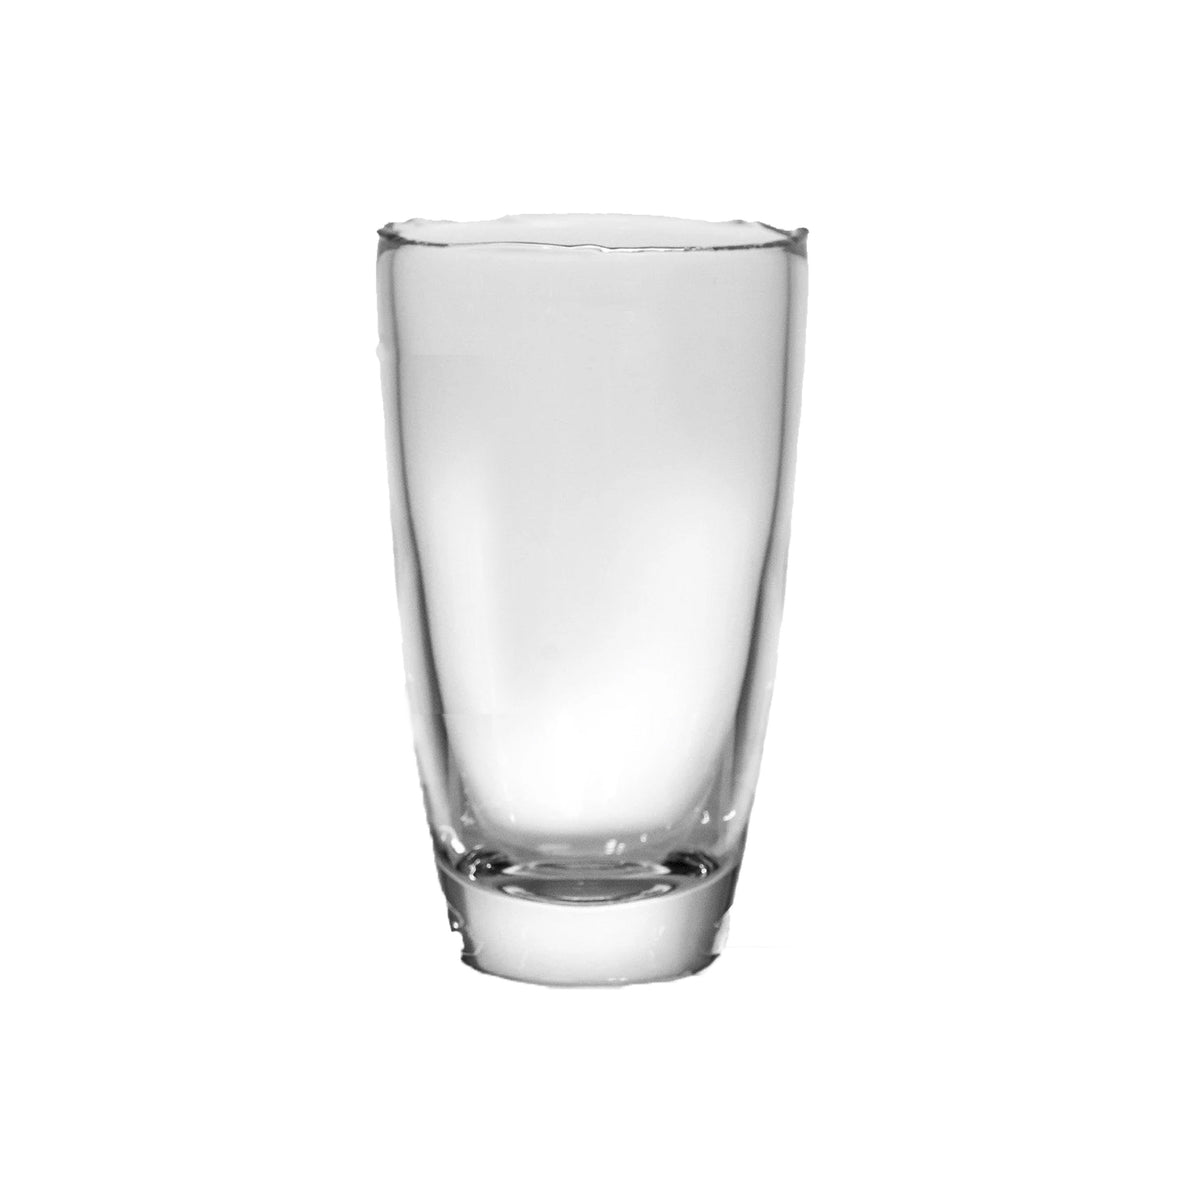 Large Drinking Glass